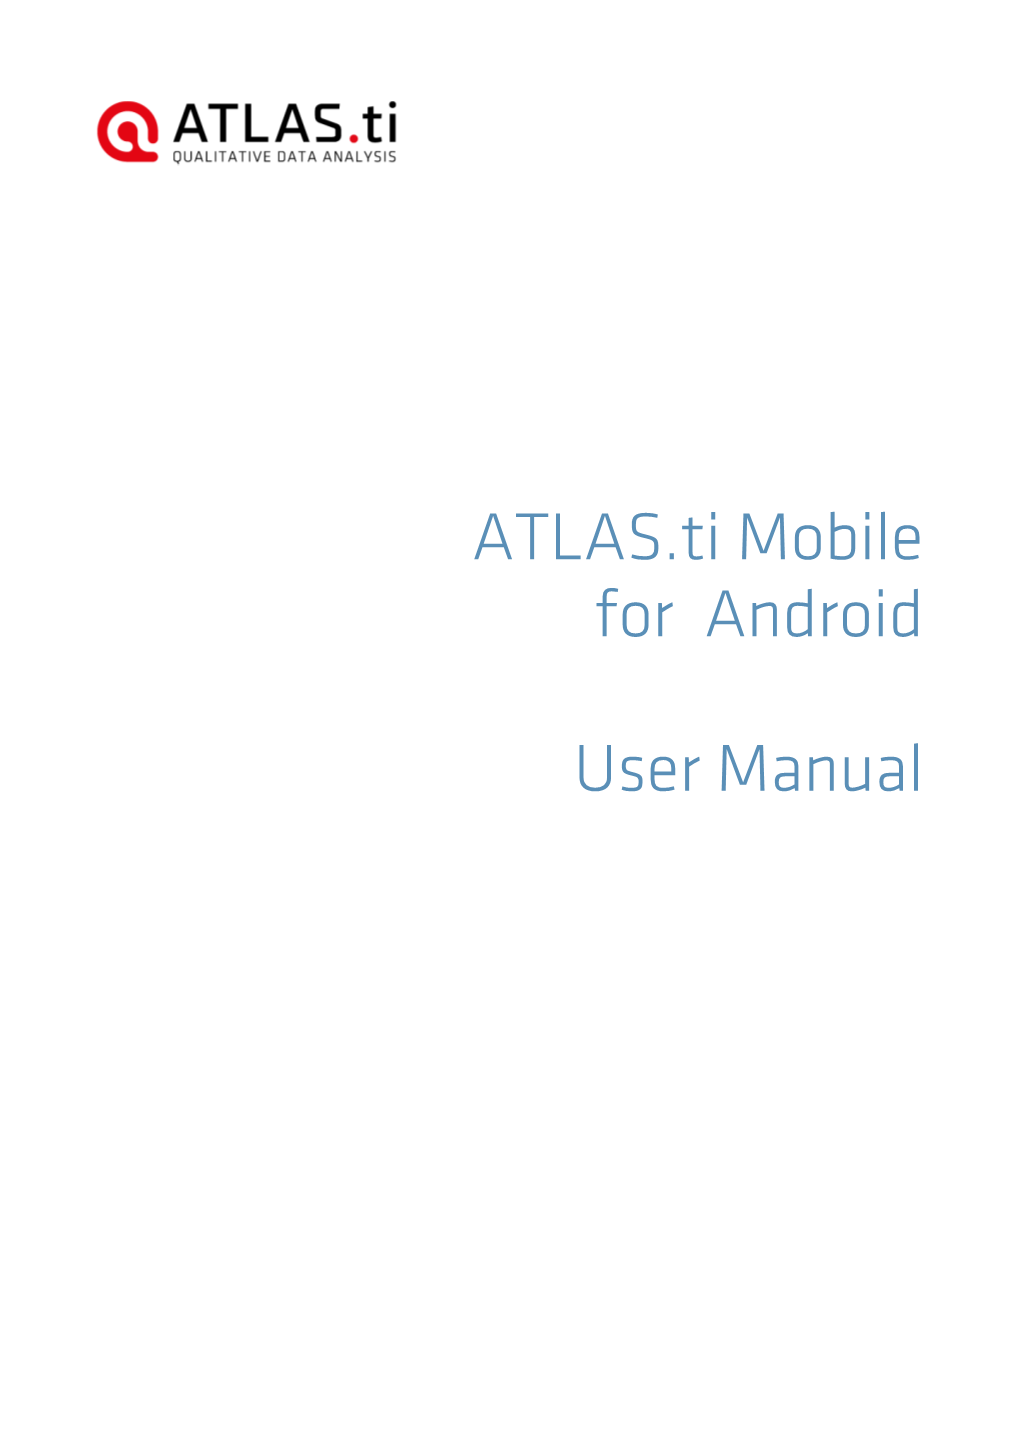 ATLAS.Ti Mobile for Android